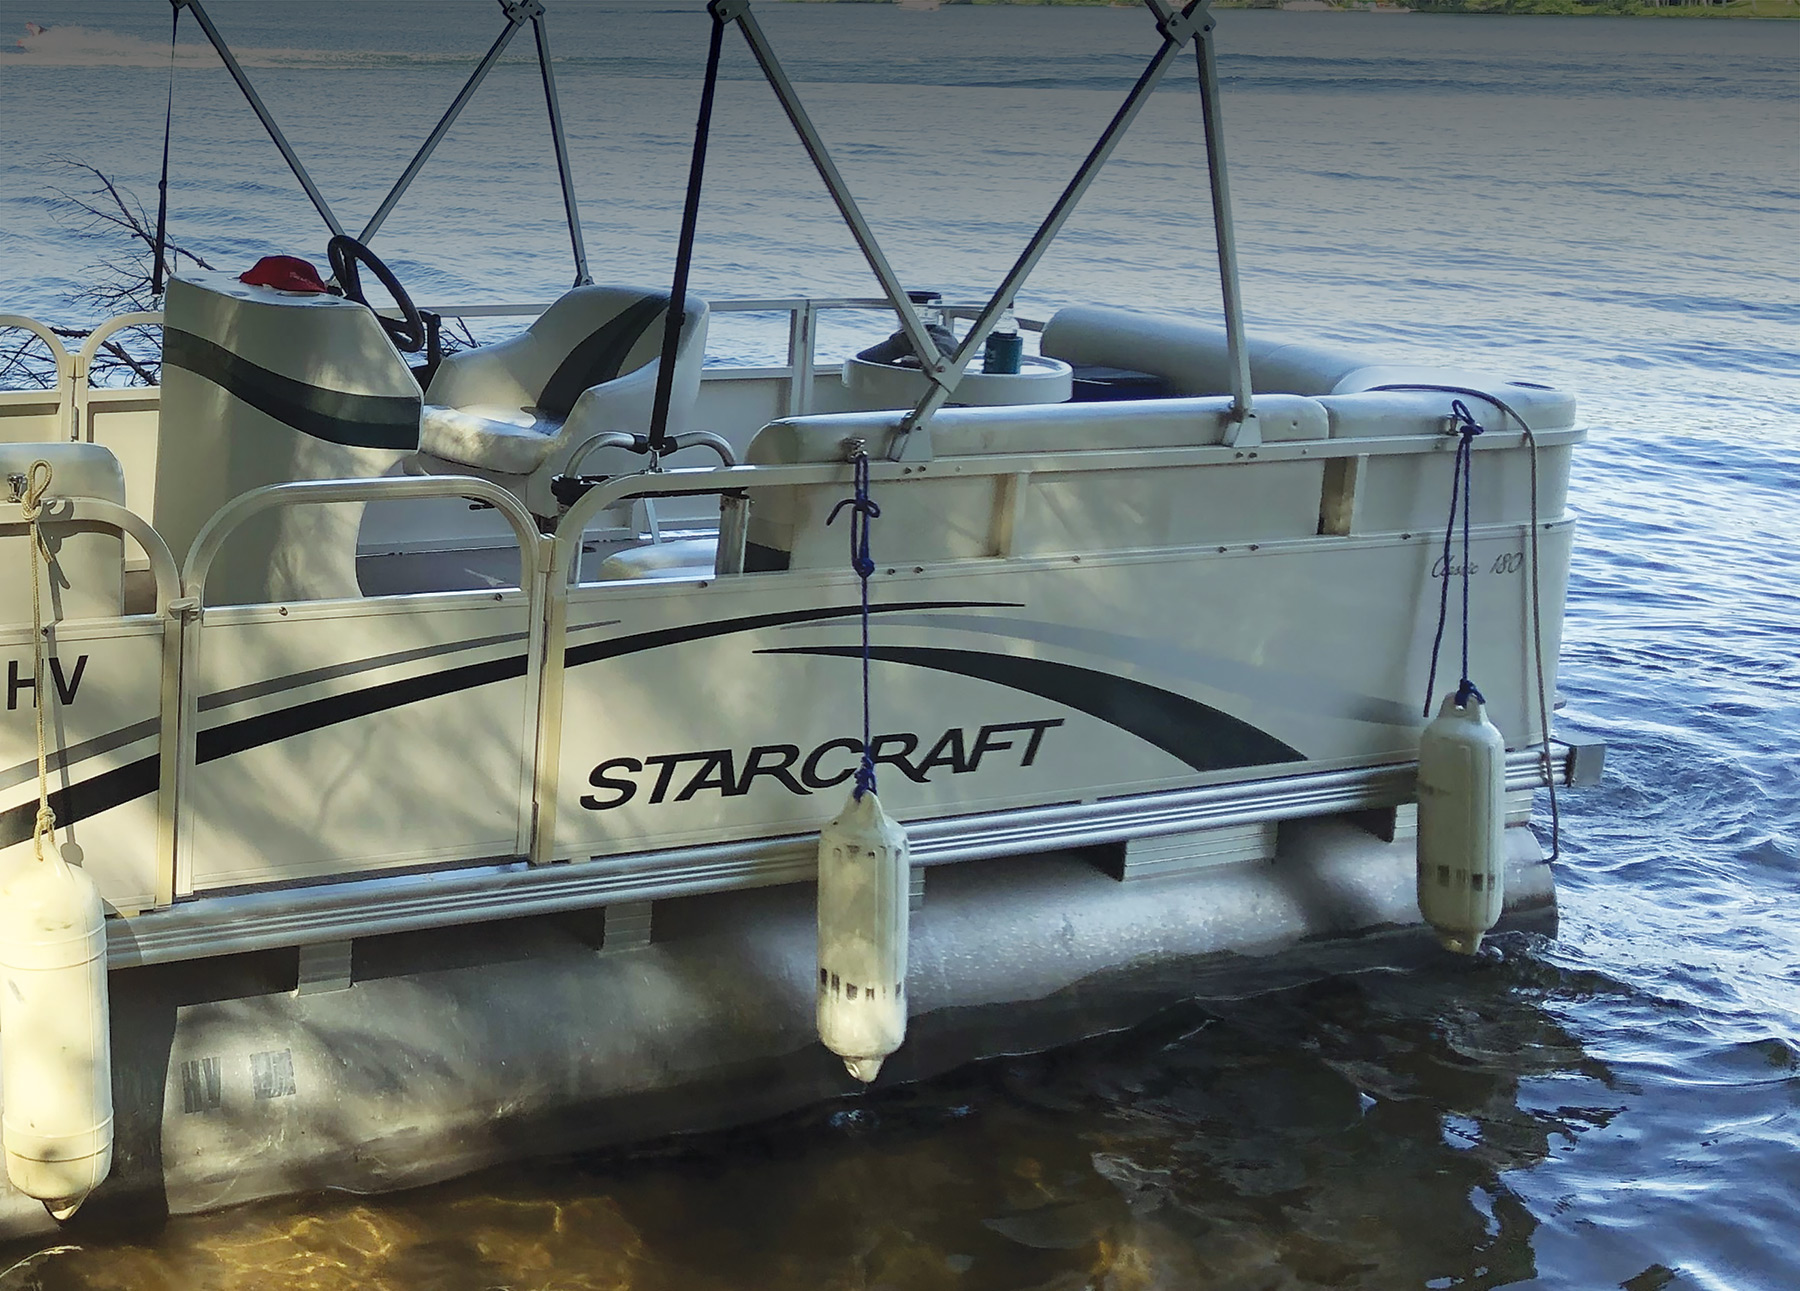 Side view of Starcraft Marine Classic 180 boat fenders hanging docked at sea during the day